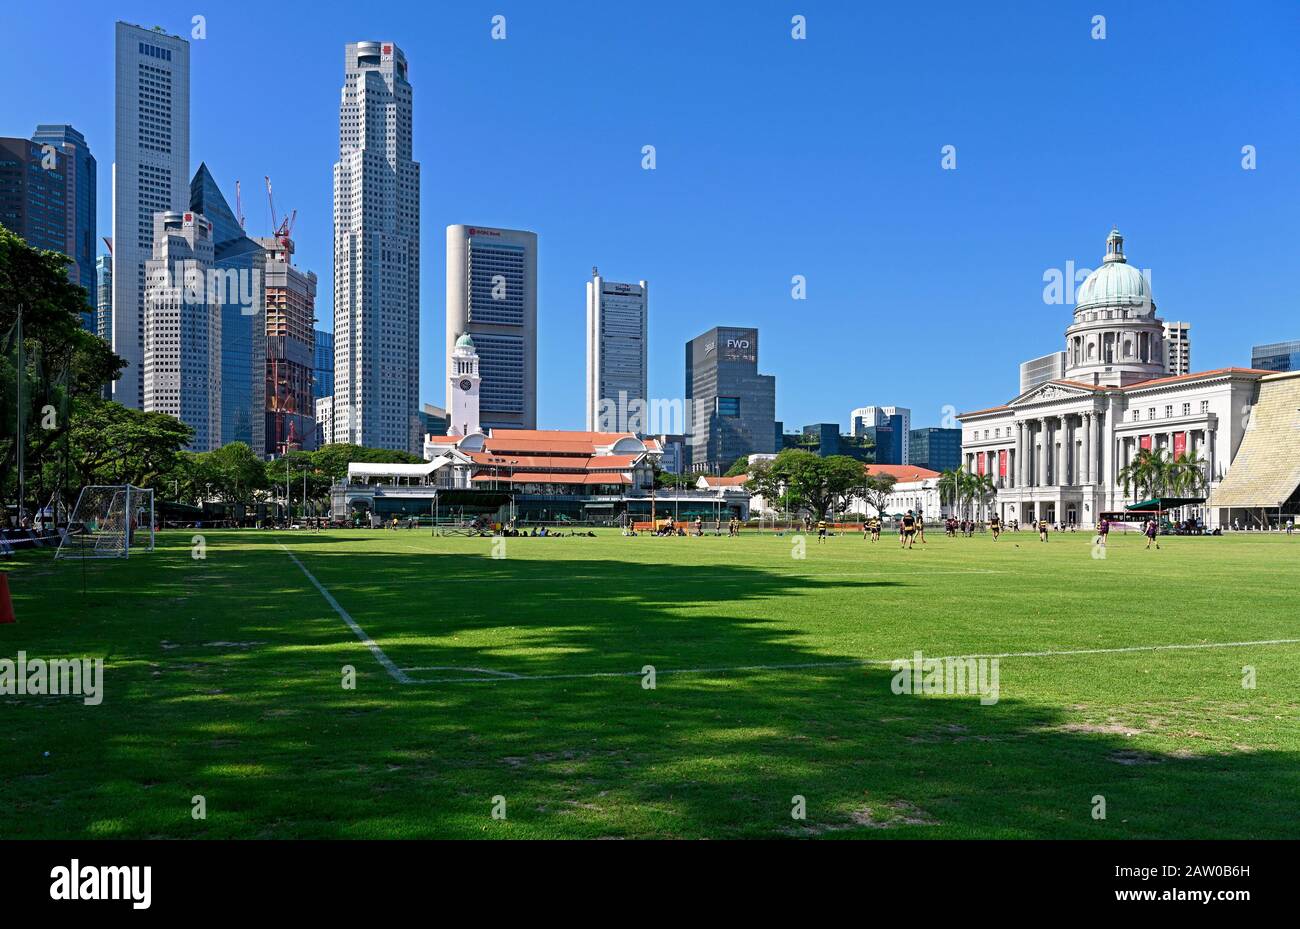 singapore, singapore - 2020.01.25: view onto Singapore cricket club, civic district, national gallery, victoria theatre and concert hall and central b Stock Photo